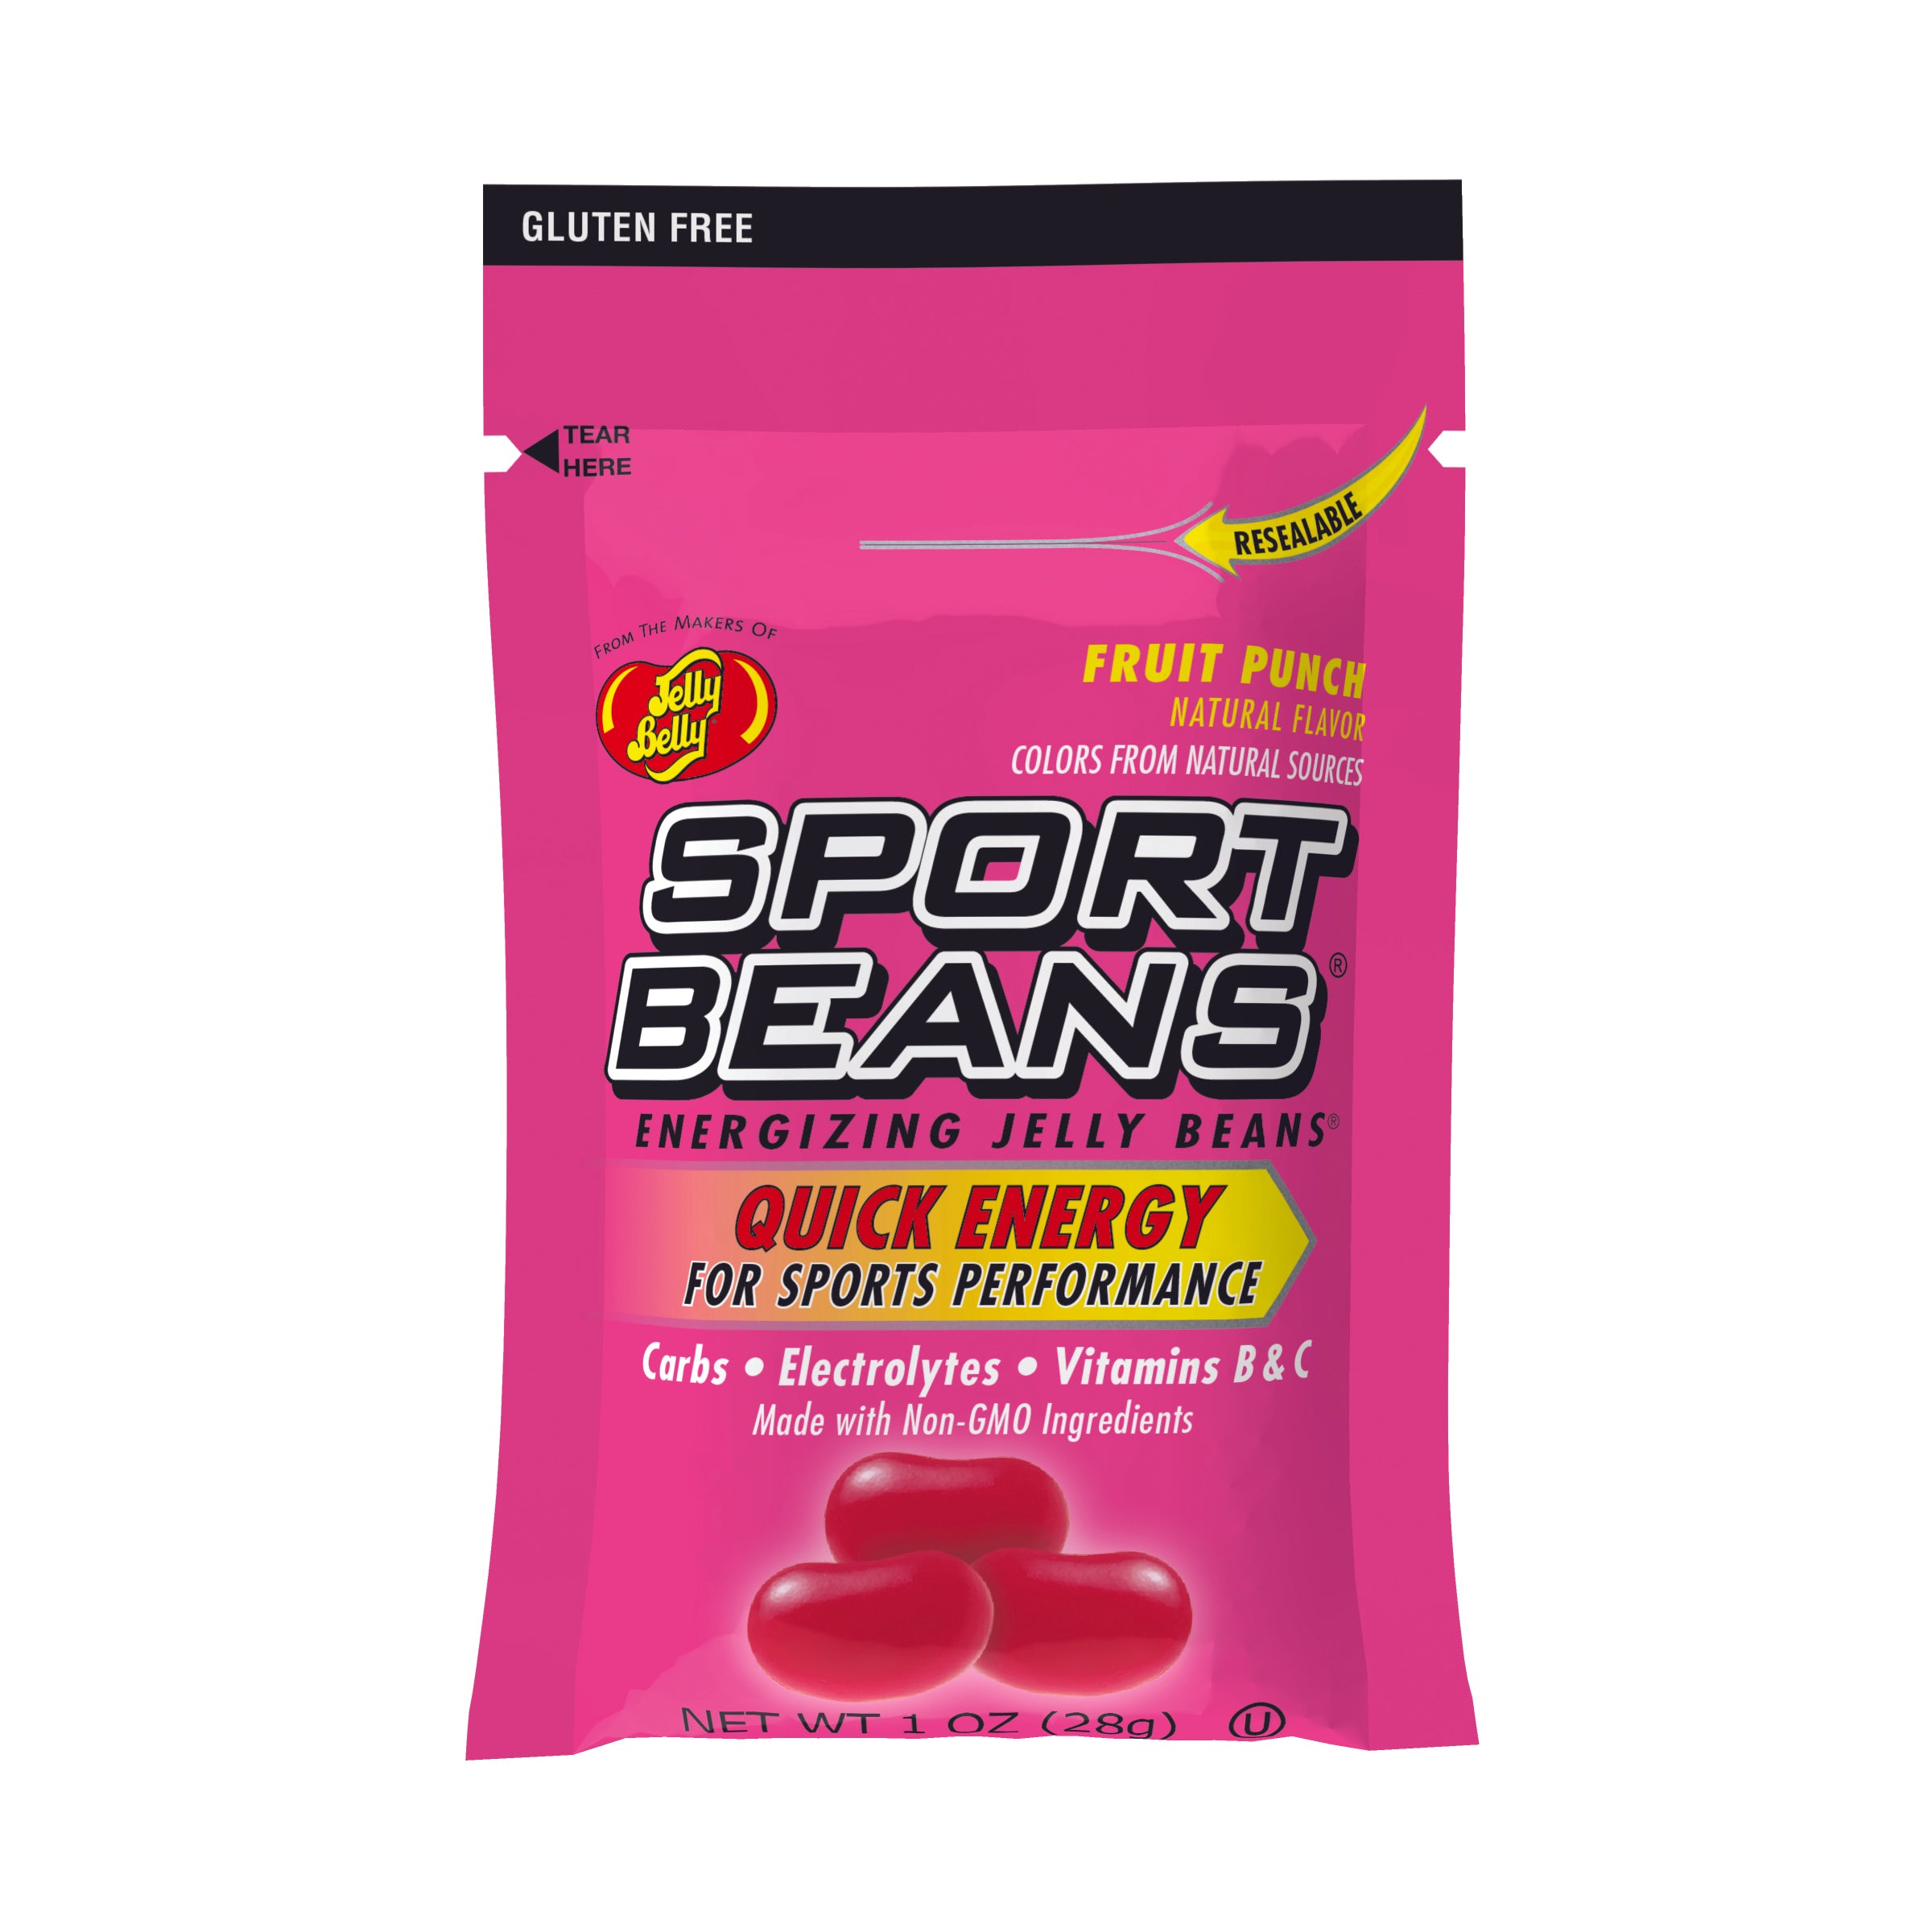 JELLY BELLY JELLY BELLY BEANS FRUIT PUNCH